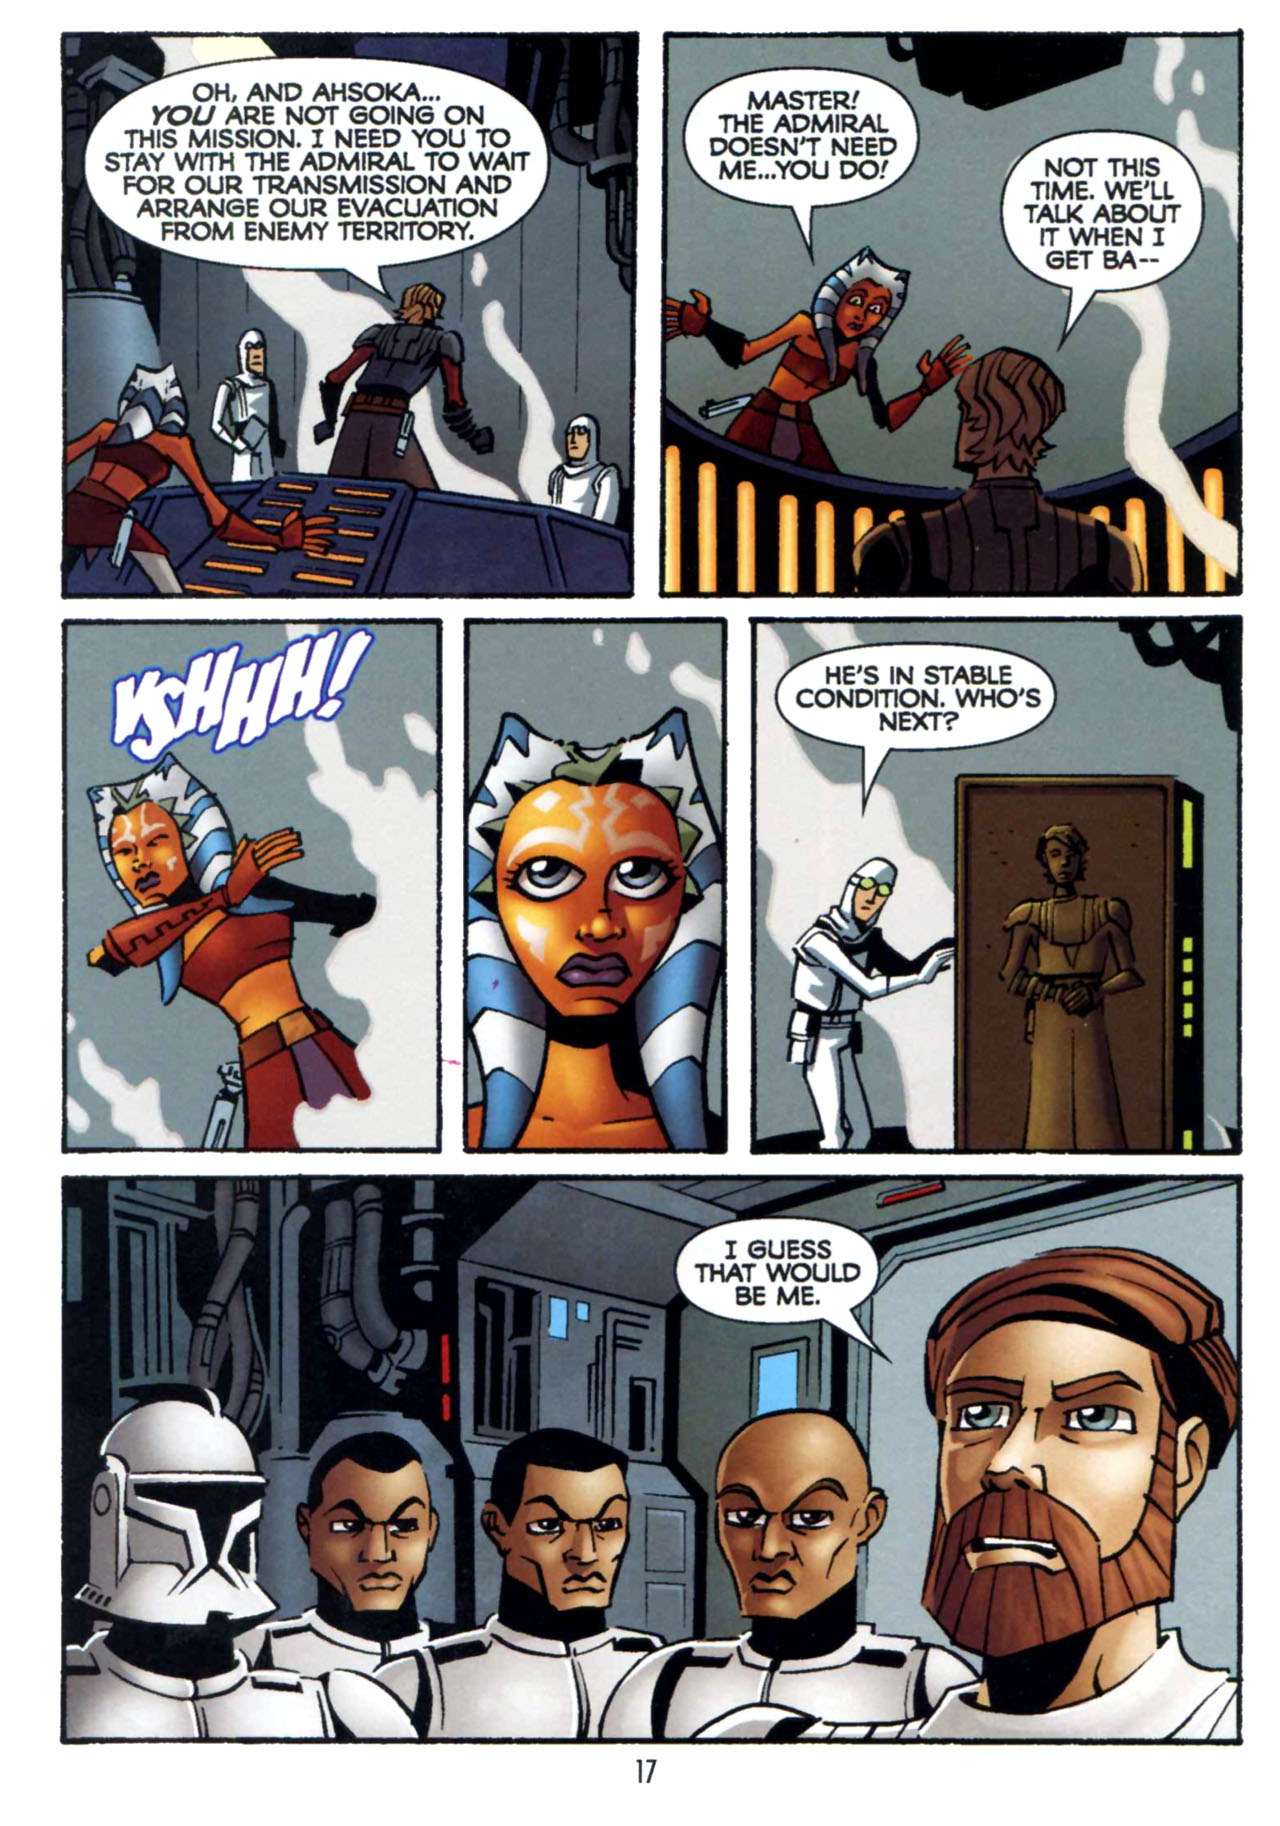 Read online Star Wars: The Clone Wars - Shipyards of Doom comic -  Issue # Full - 16